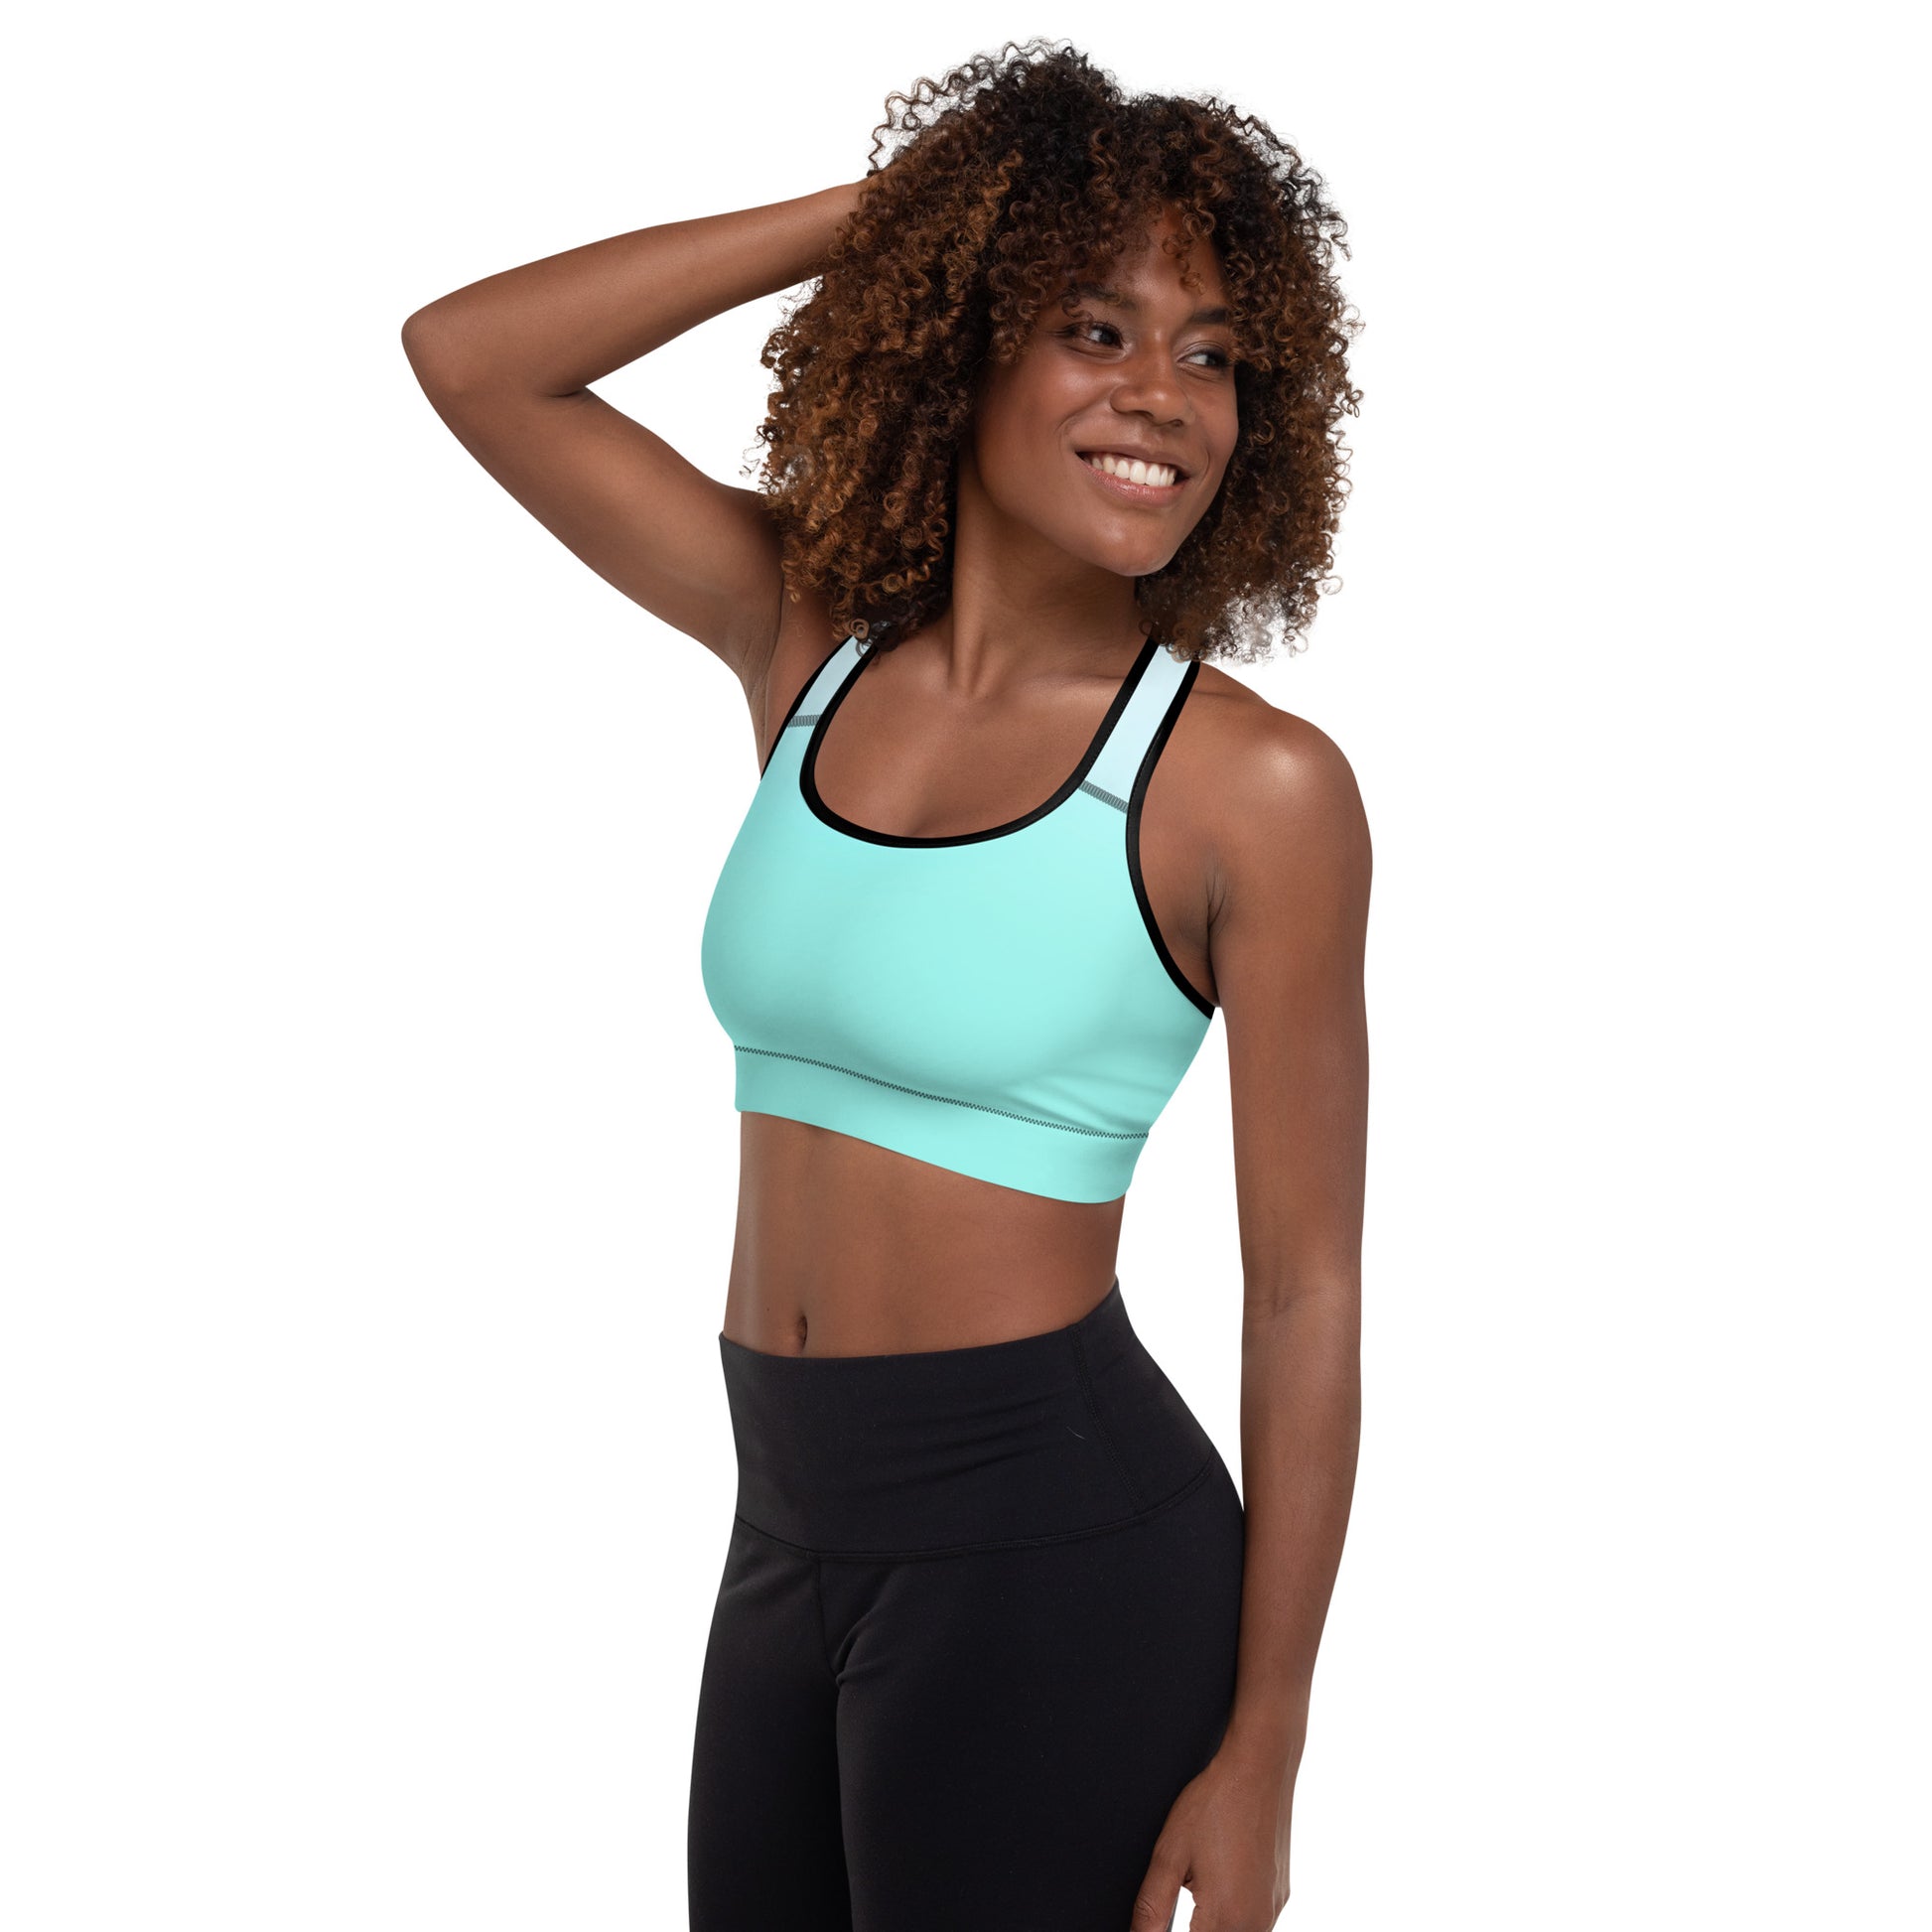 Introducing the Aqua Gradient BeSculpt Women Padded Sports Bra—a must-have for your active lifestyle!